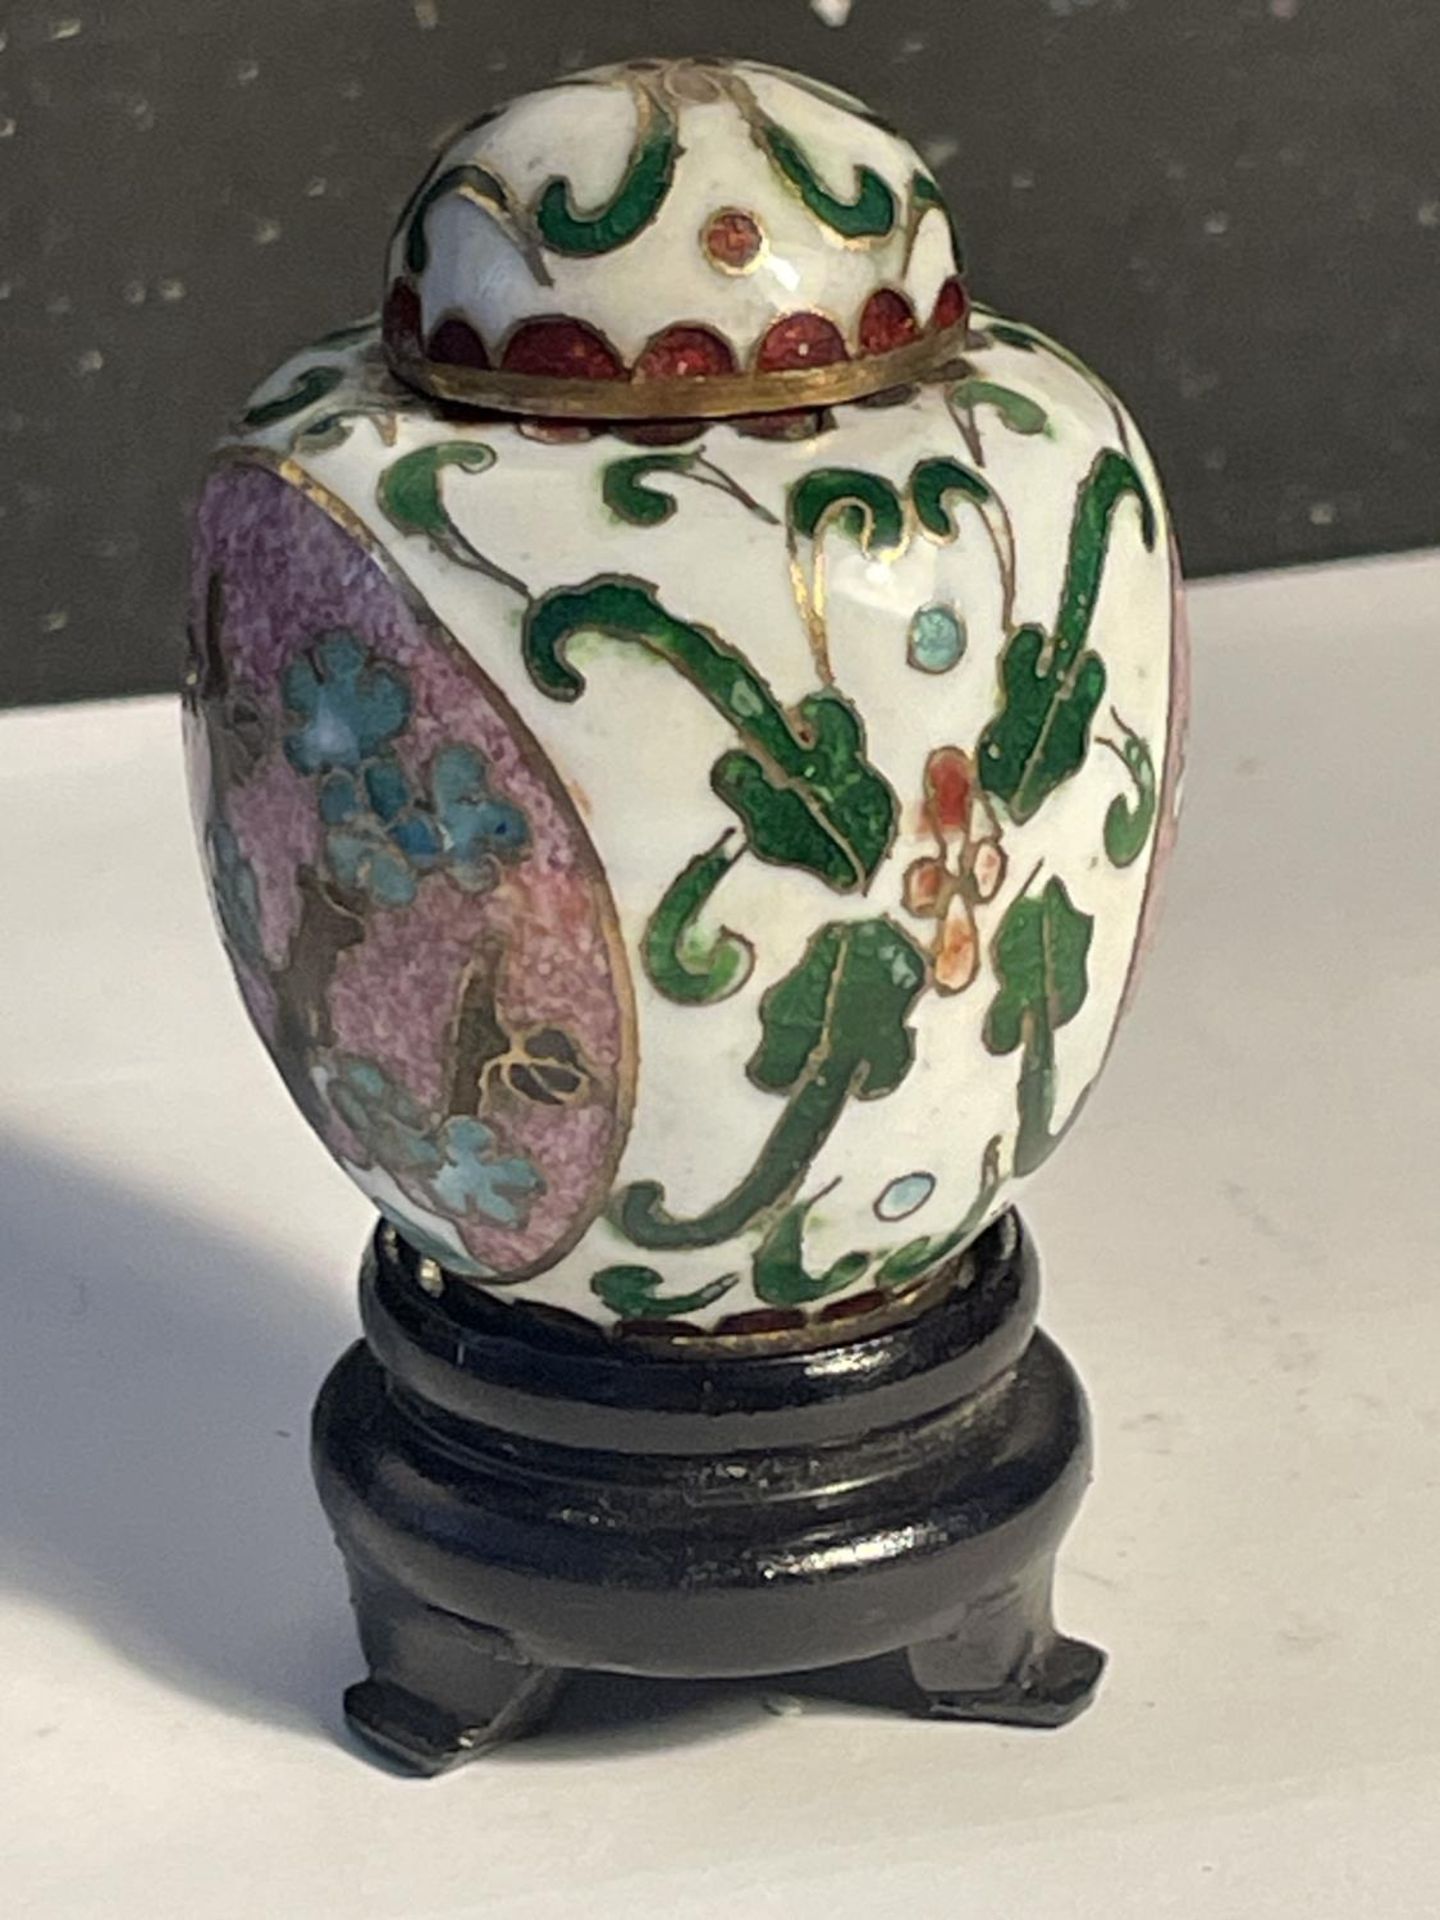 A MINIATURE CLOISONNE LIDDED GINGER JAR ON A WOODEN STAND - Image 2 of 4